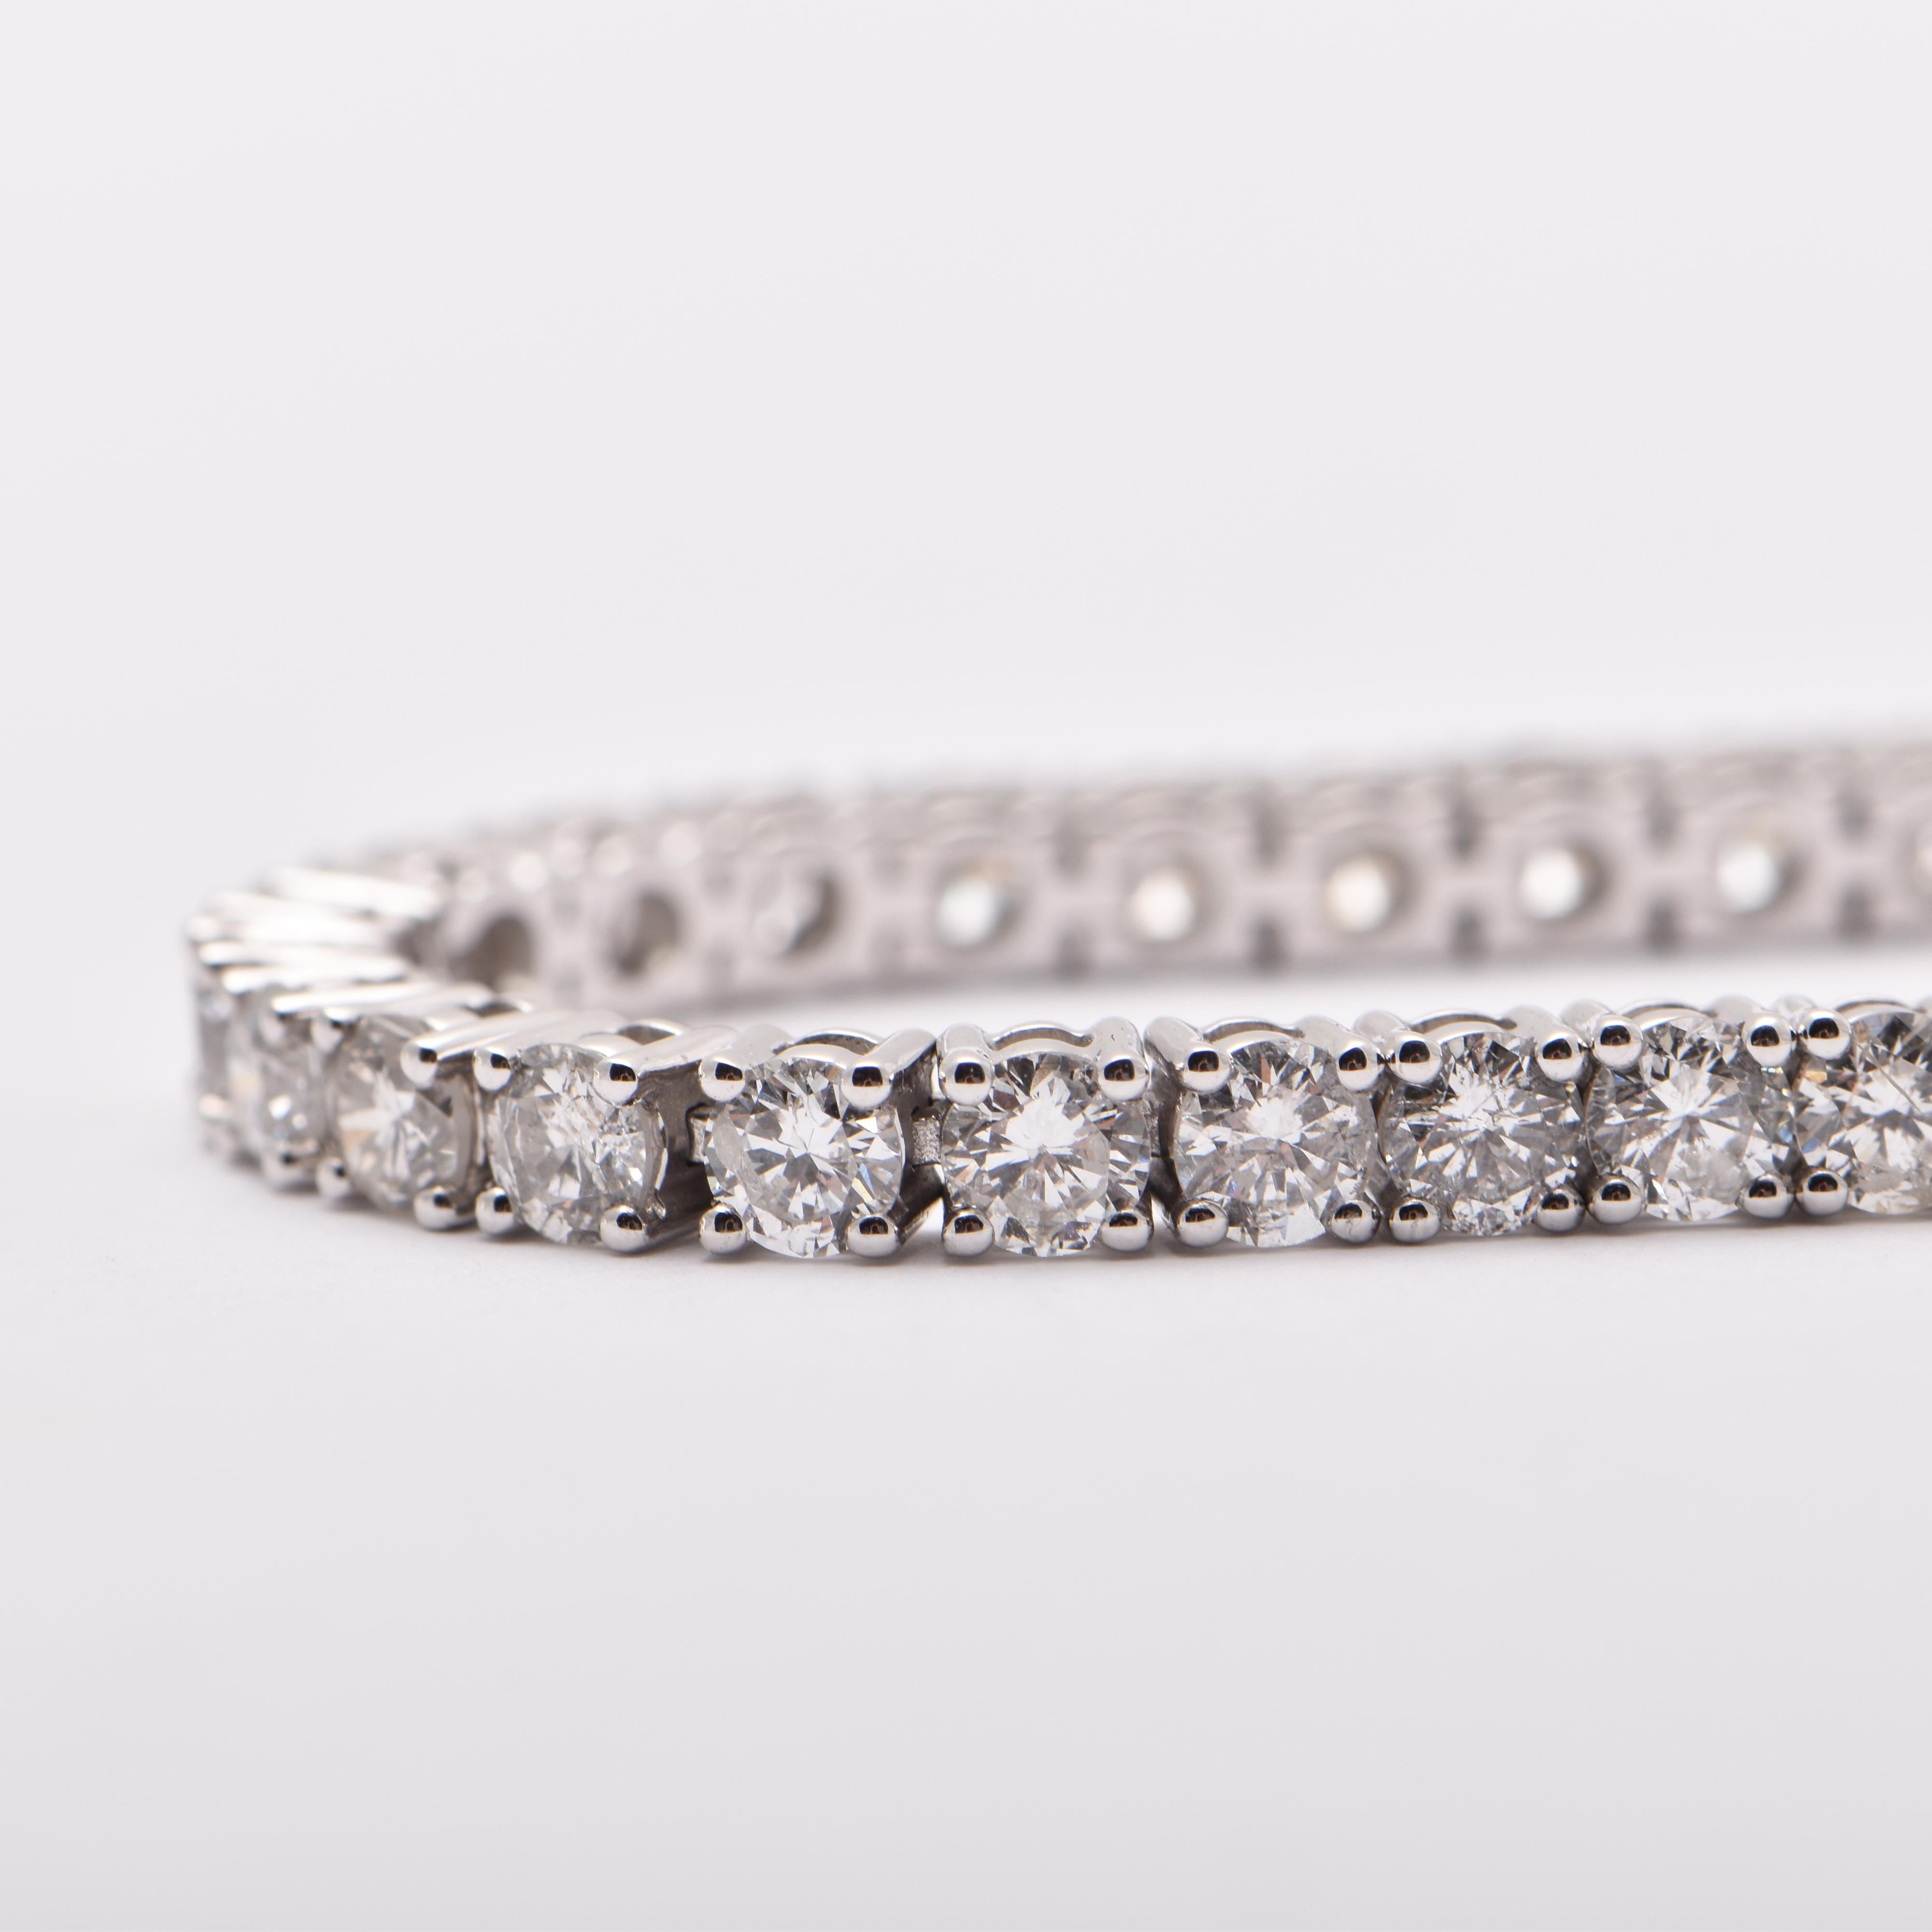 Diamond tennis bracelet; featuring 50 round brilliant cut diamonds totalling 6.75 Carats, set in 18ct white gold (total 11.96 grams)   

FREE express postage usually 3-4 days Sydney to New York  
FREE international insurance 
by Cartmer Jewellery,